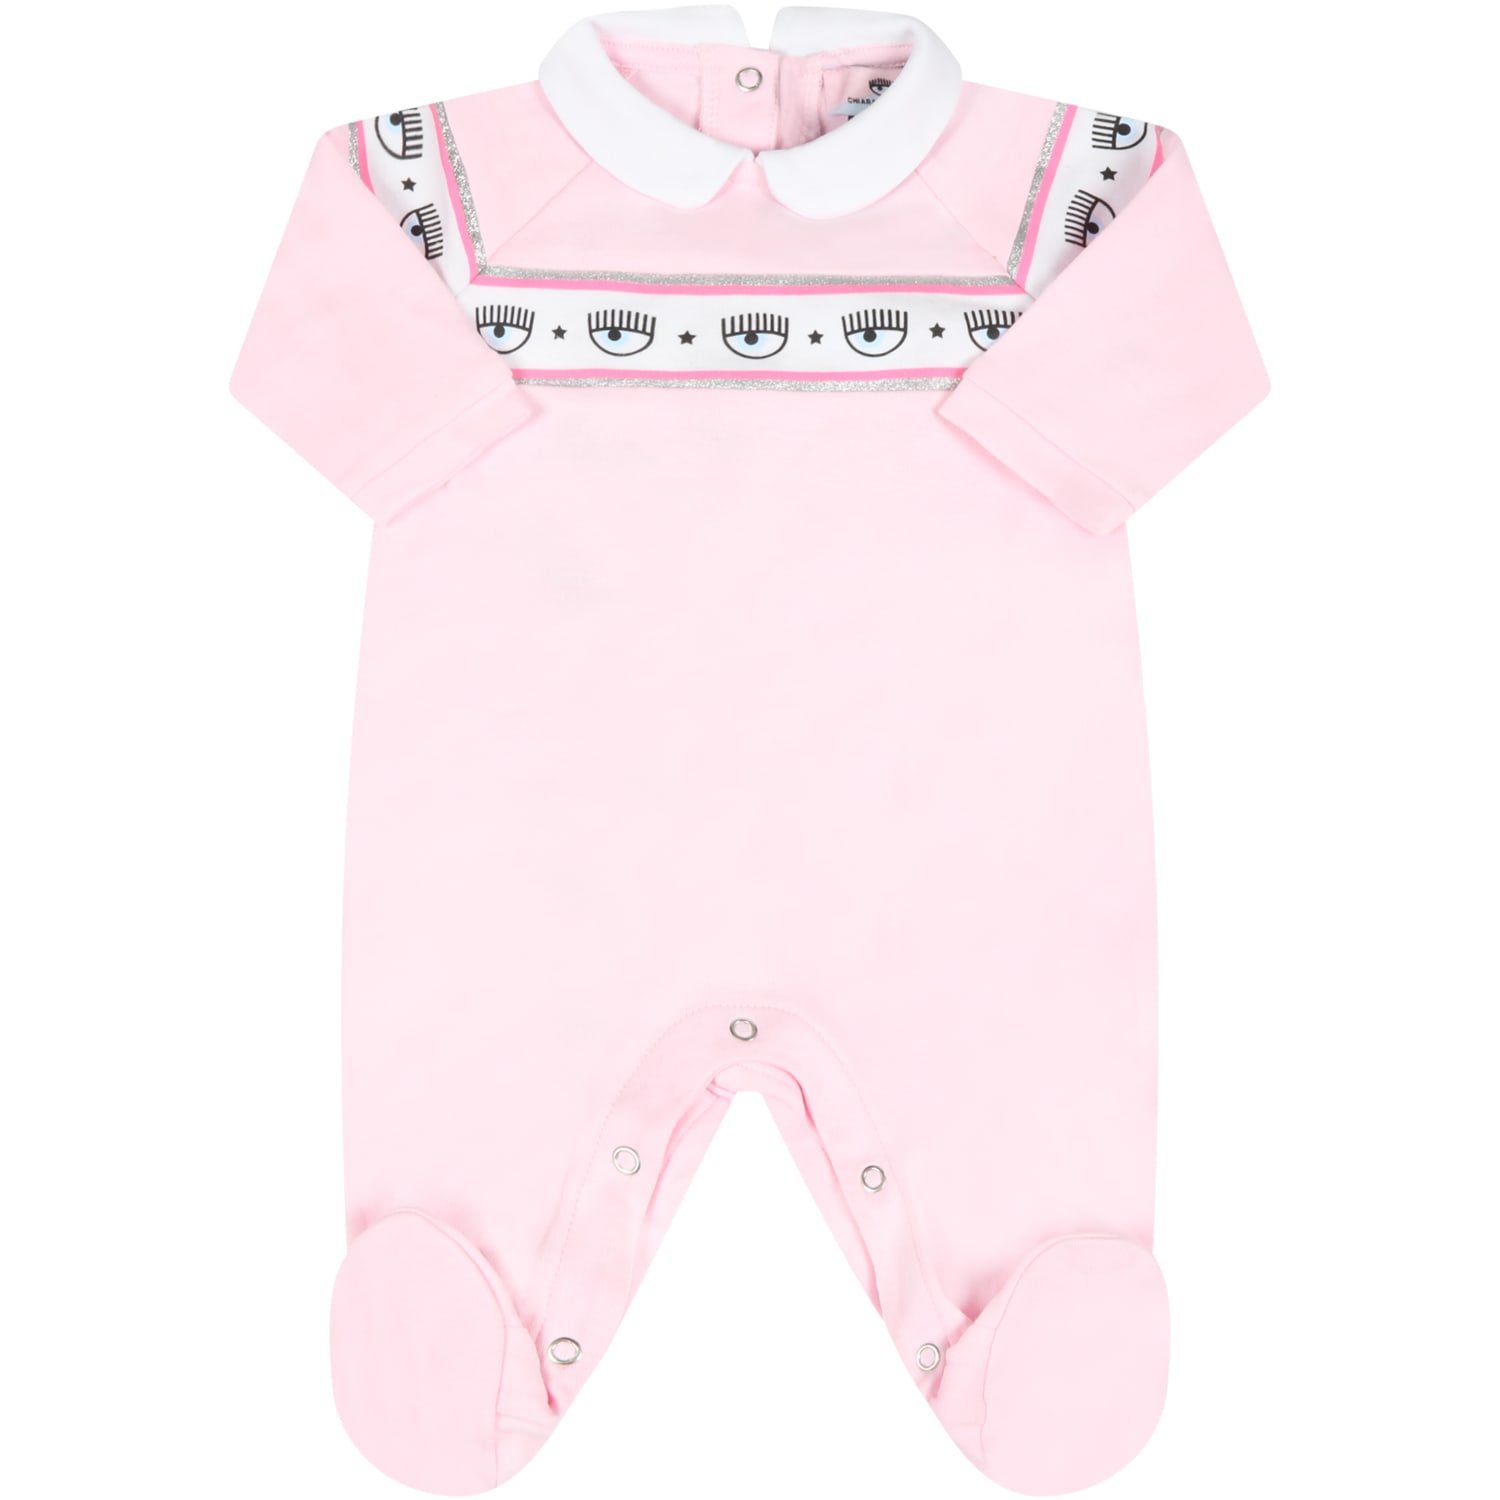 Chiara Ferragni Pink Babygrow For Baby Girl With Iconic Eyes